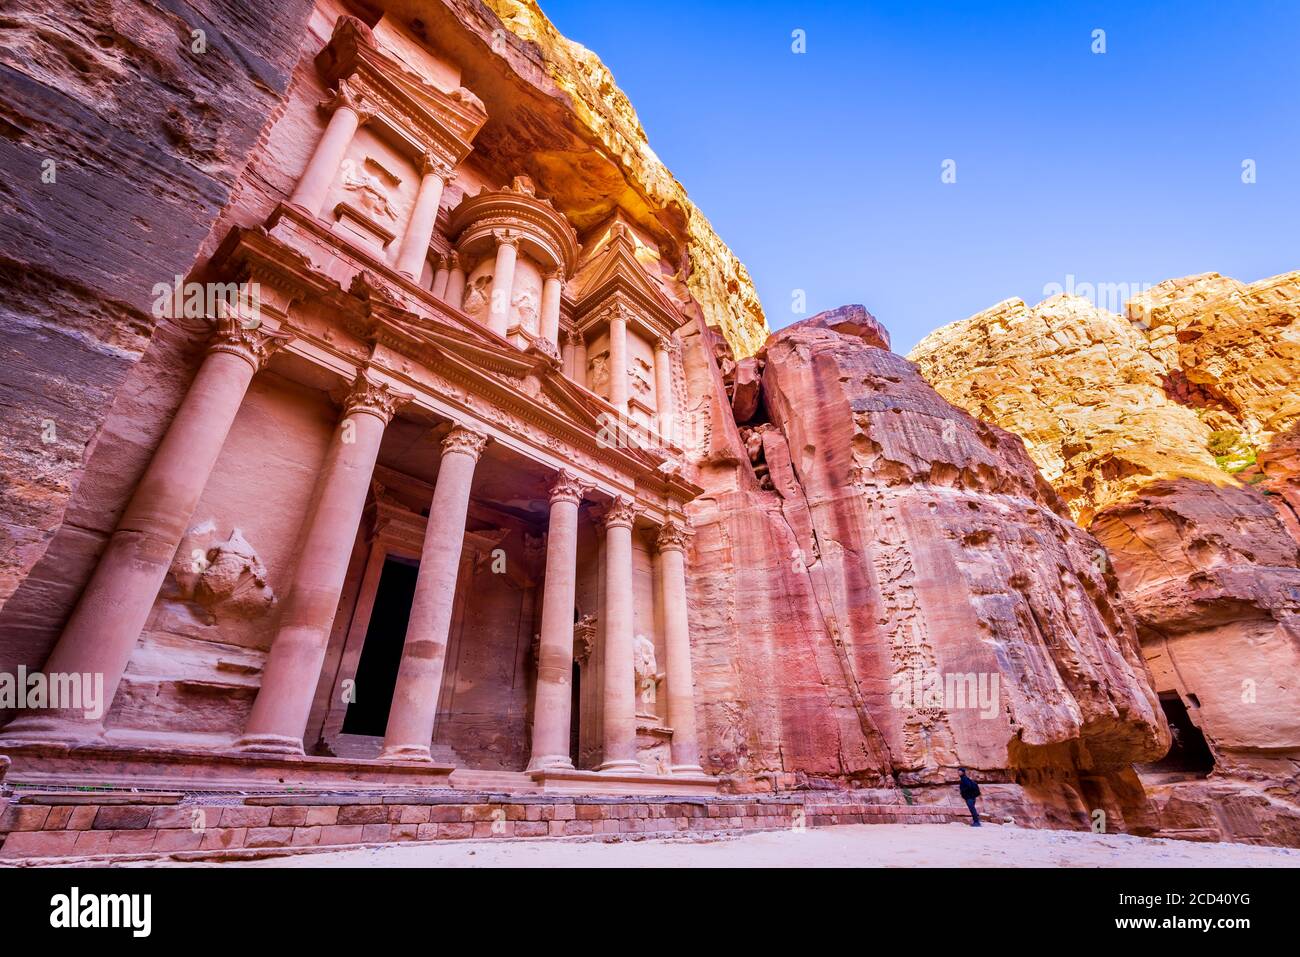 Wadi Musa, Jordan - Siq and the Treasury, Al Khazneh in the ancient Petra one of the new Seven Wonders of the World. Stock Photo